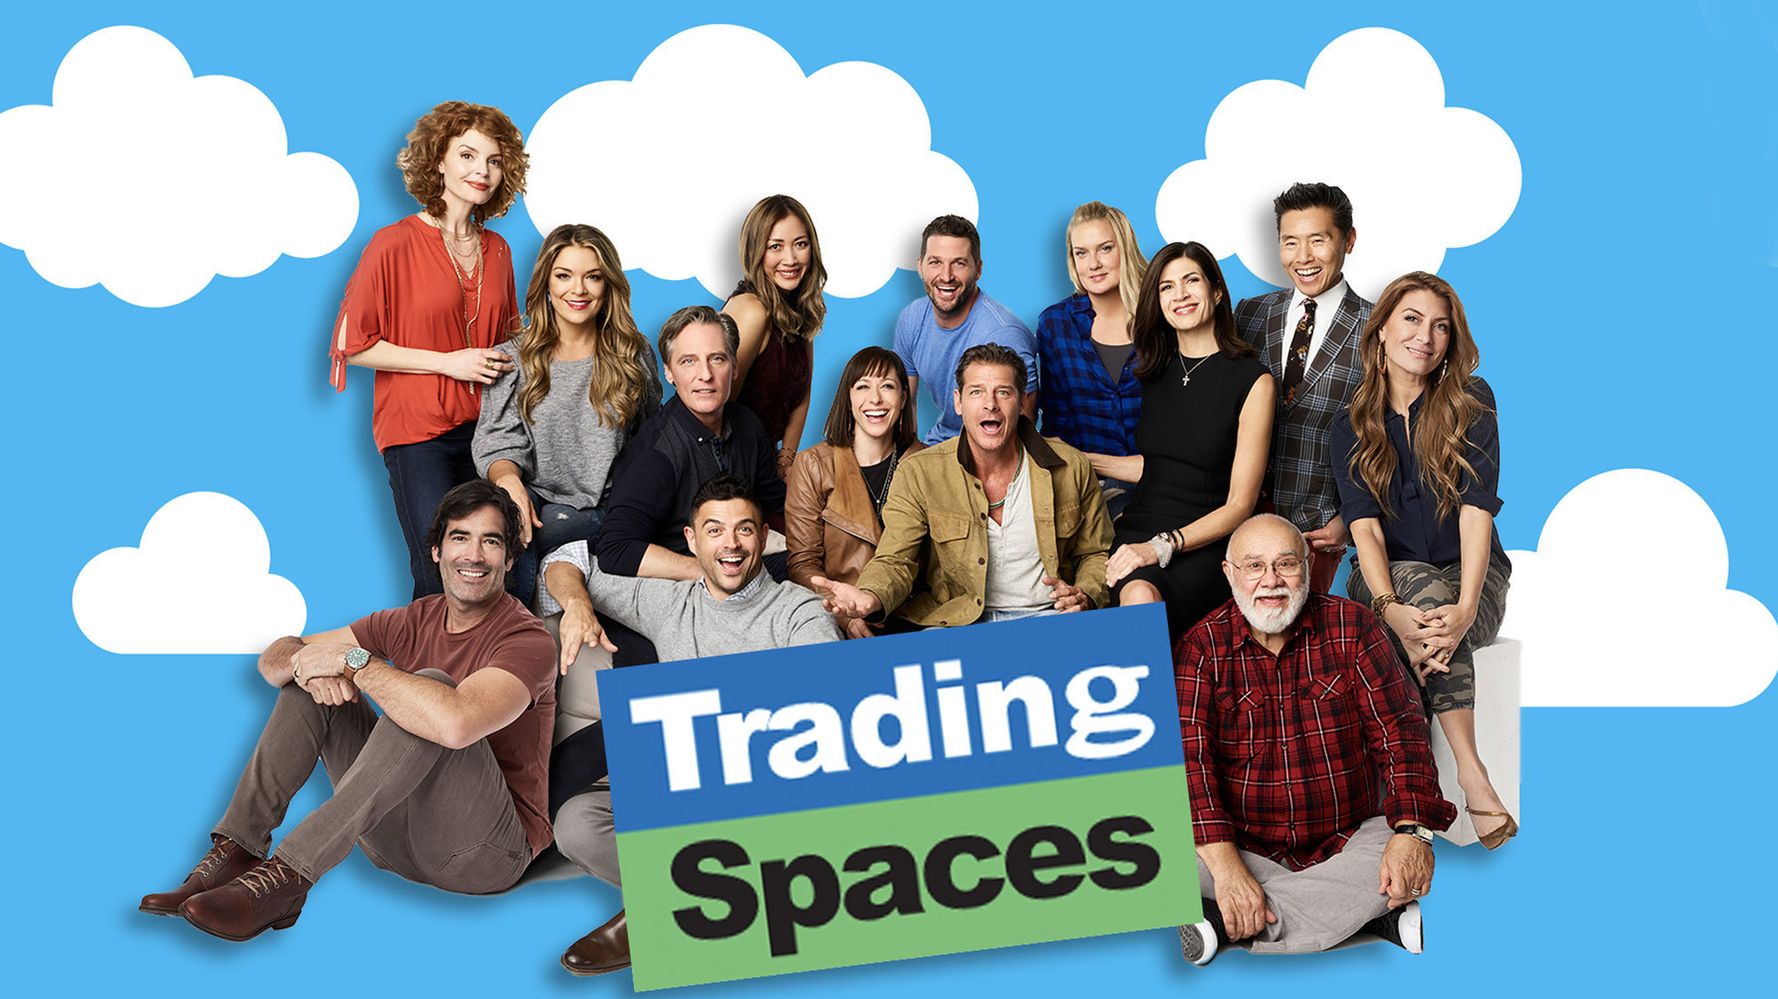 Trading spaces